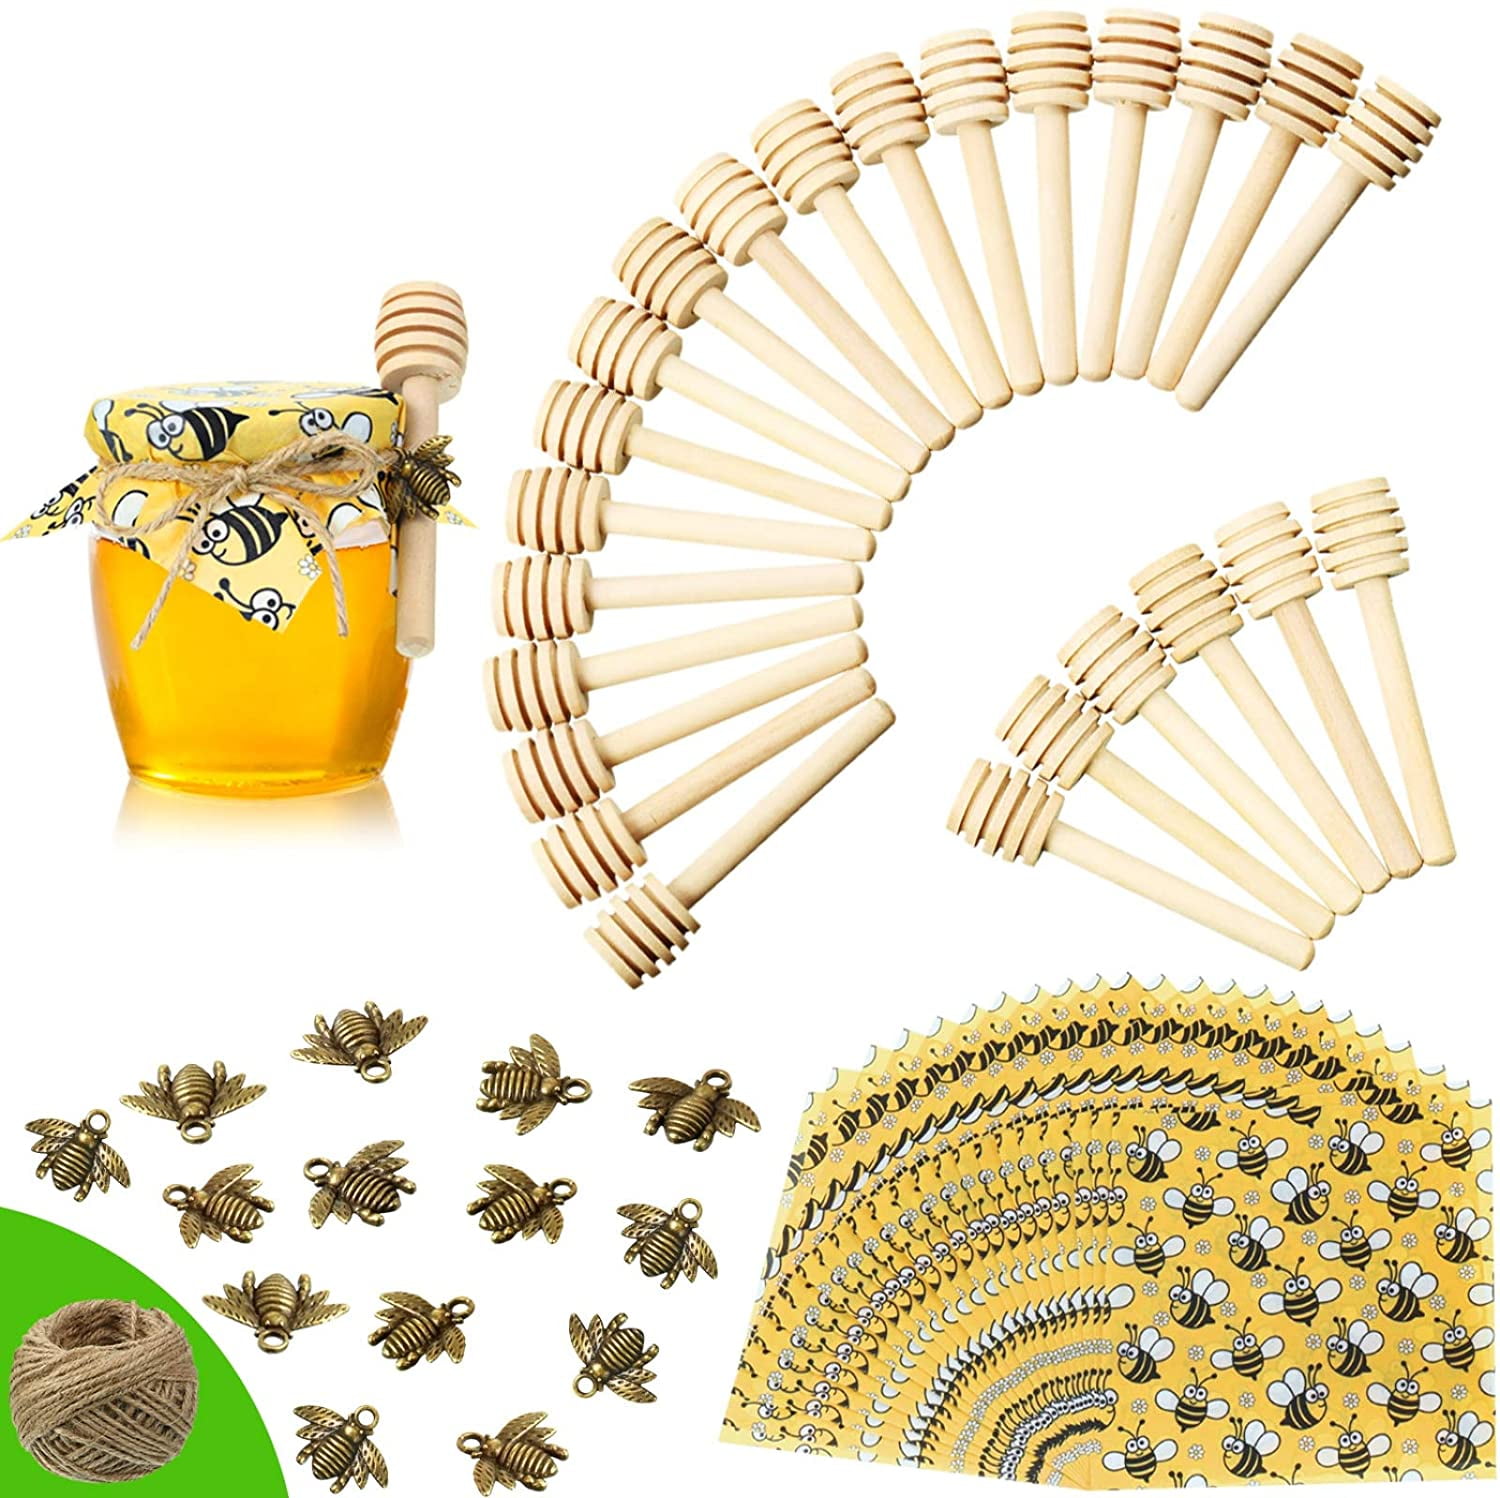 50 Pieces 3 Inch Wooden Honey Dipper Sticks Set Honey Dipper Sticks 50 pieces Honeybee Charm Pendants 50 pieces Decorative Bee Wrapping Paper with 30 Meters Jute Hanging Rope for Honey Jar DIY Crafts 